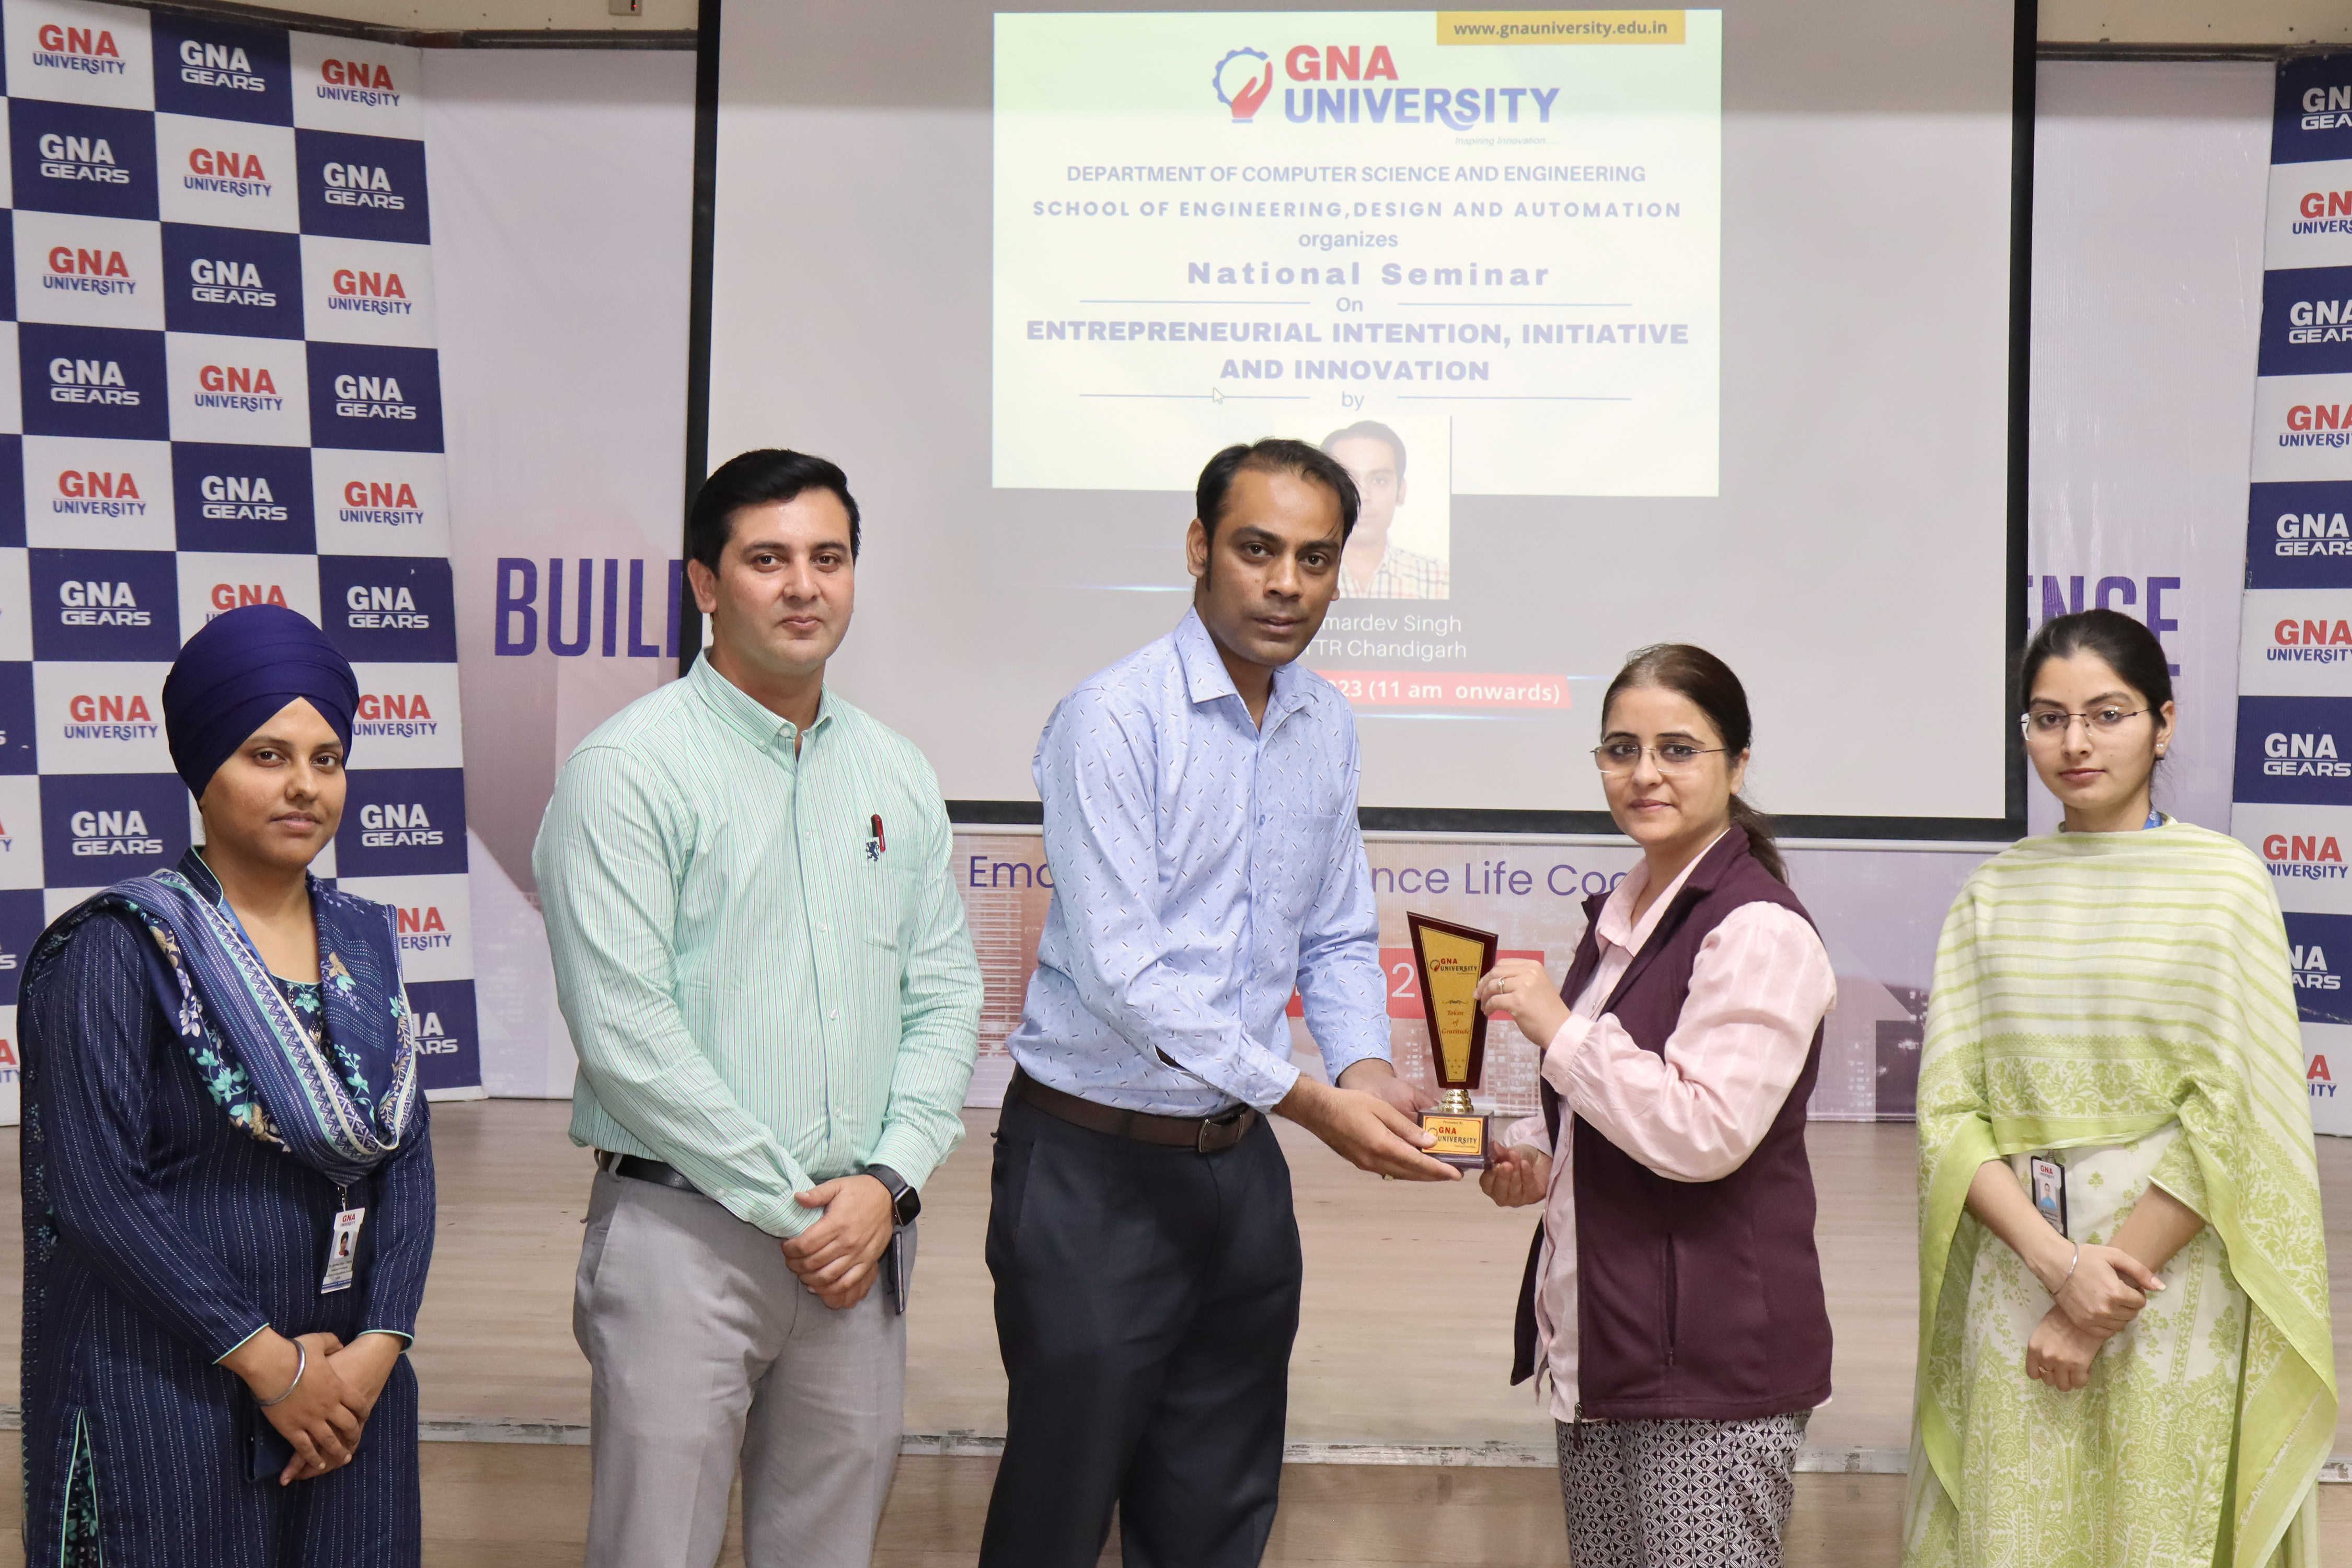 GNA University organized National Seminar on “Entrepreneurial Intention, Innovation, and Invention”